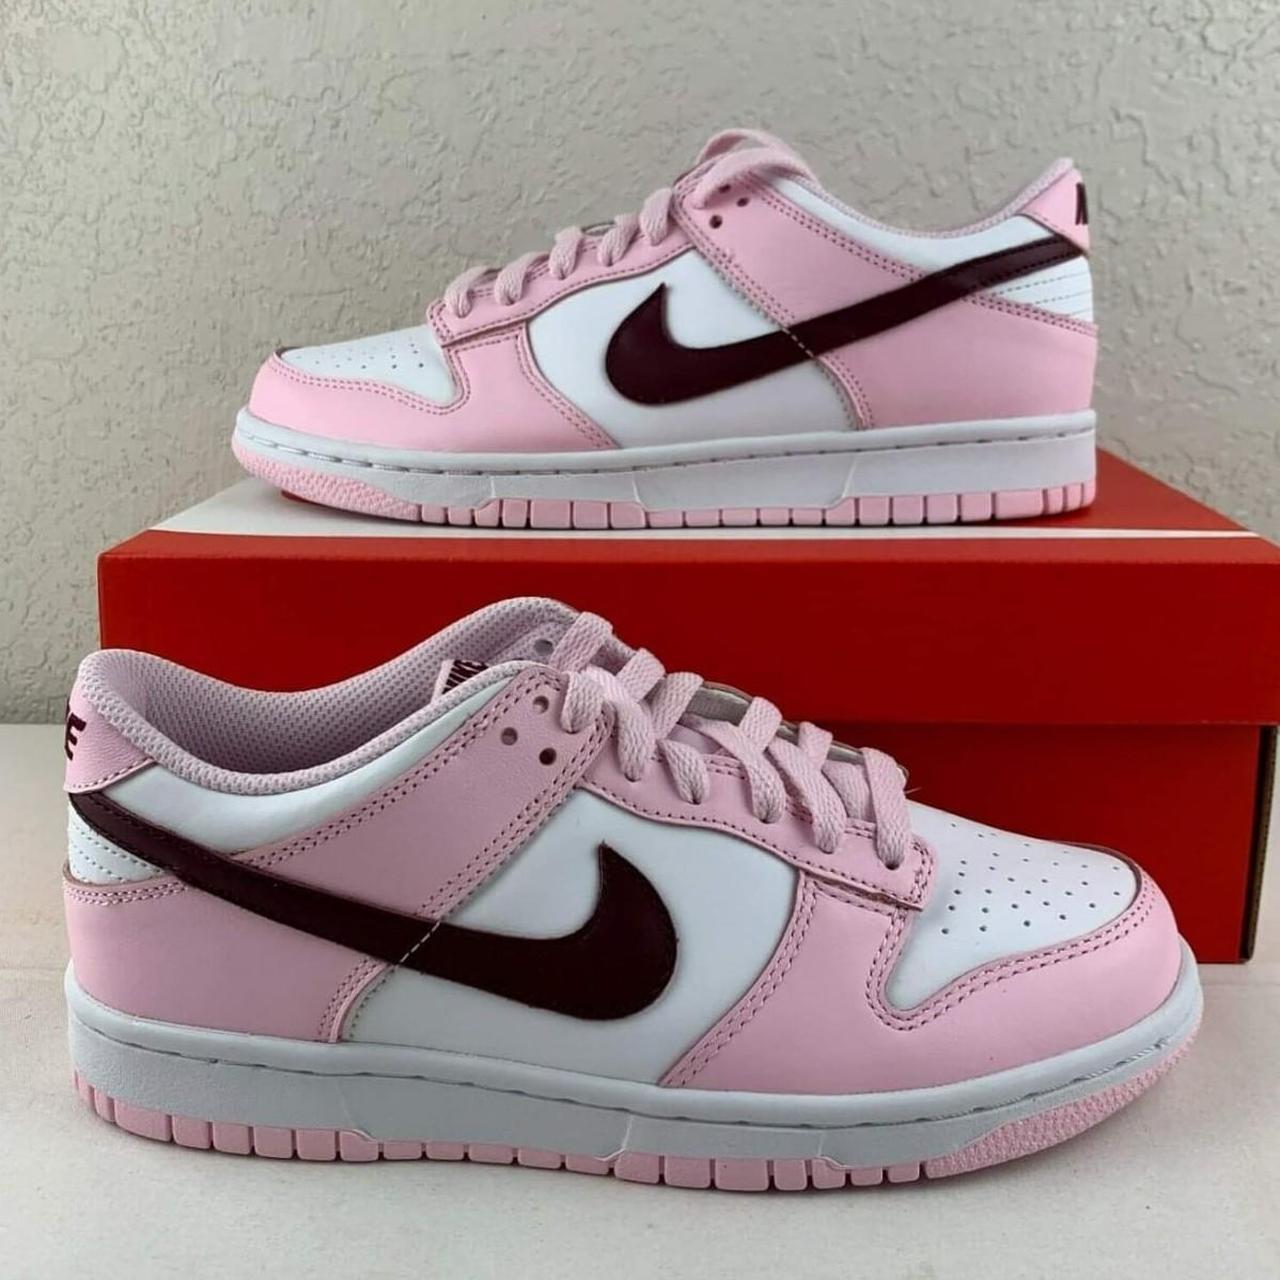 Jordan Women's White and Pink Trainers | Depop